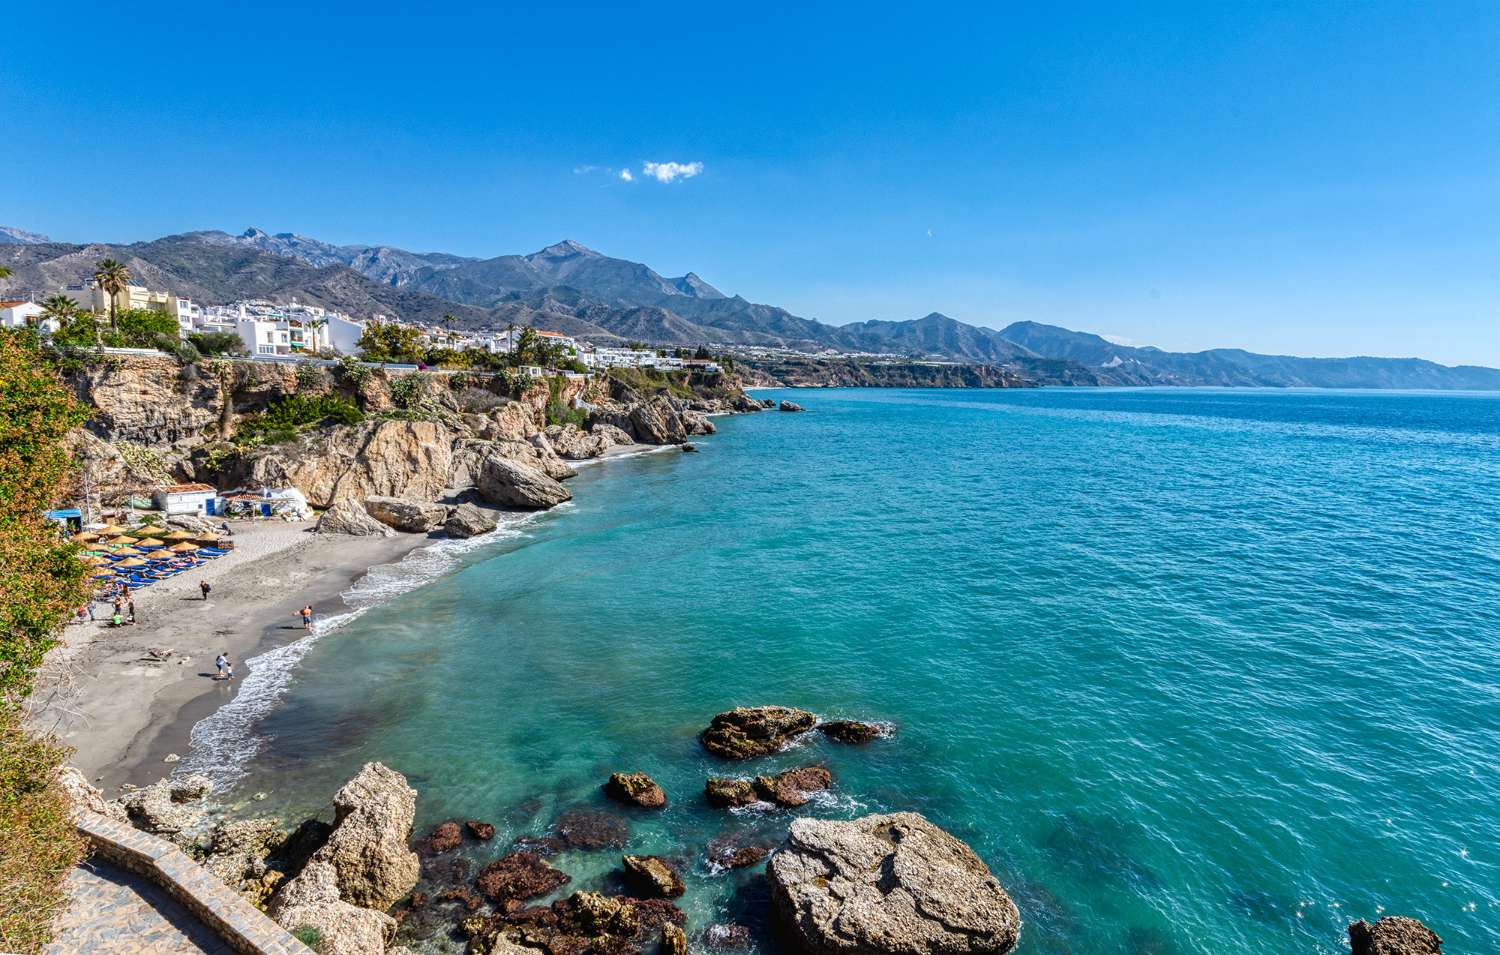 Detached villa for sale in Nerja with fantastic sea and mountain views